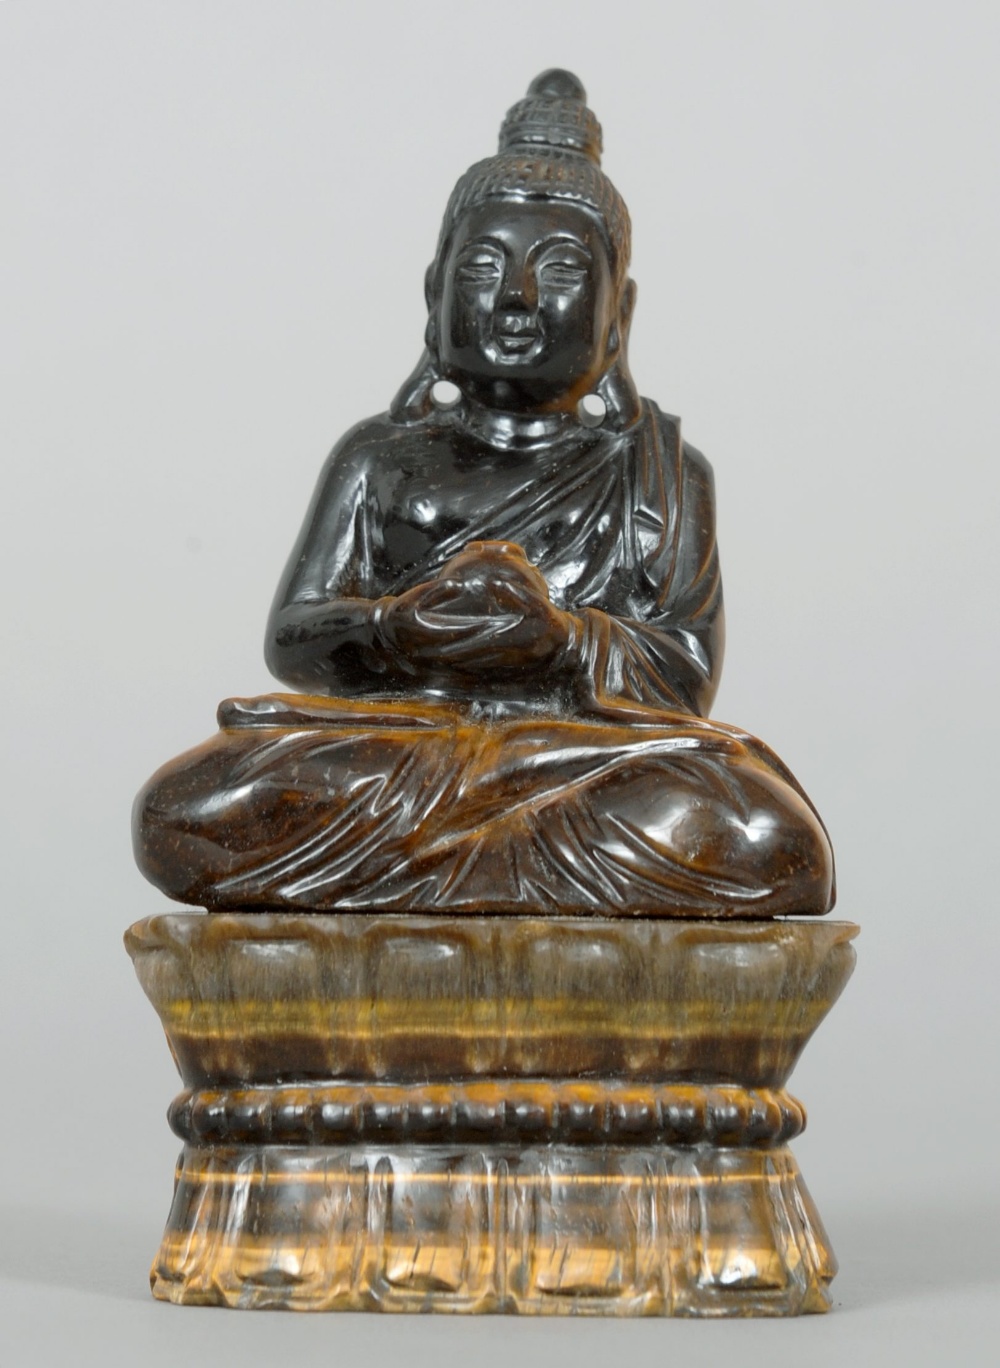 A Chinese carved “tiger’s eye” carved figure of Buddha Modelled holding a gourd and seated in the